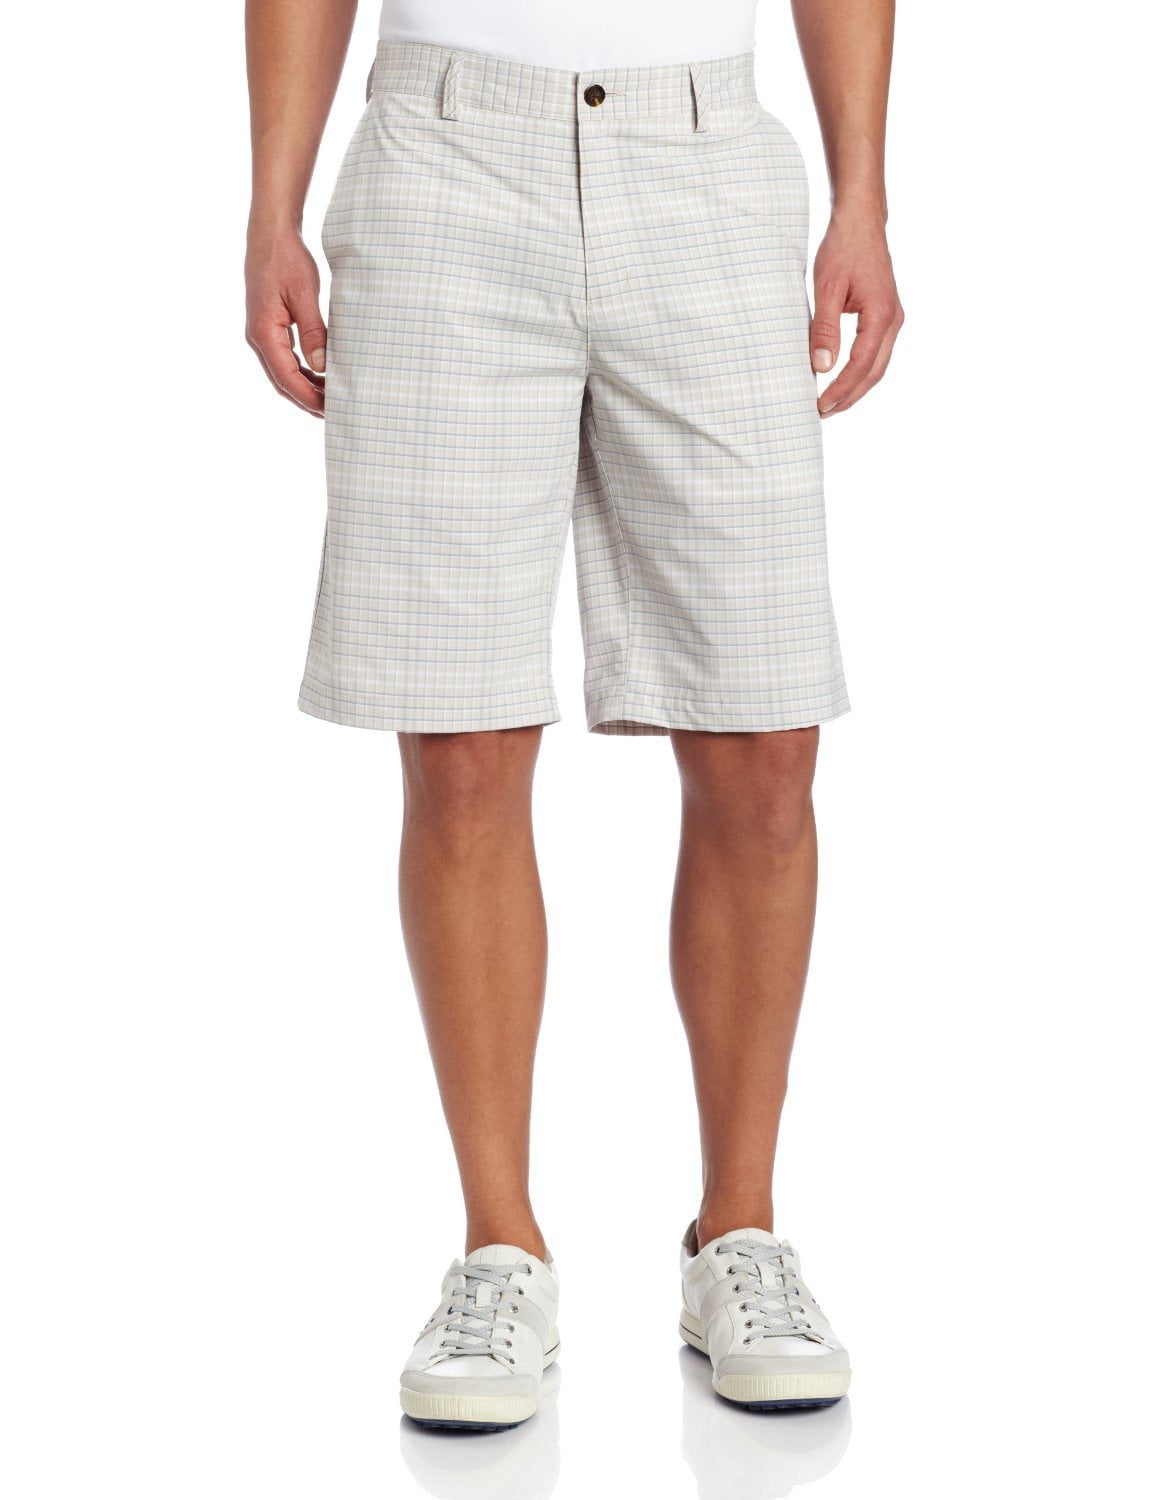 Adidas Taylormade Golf Men's Climalite Neutral Plaid Shorts - Multiple ...